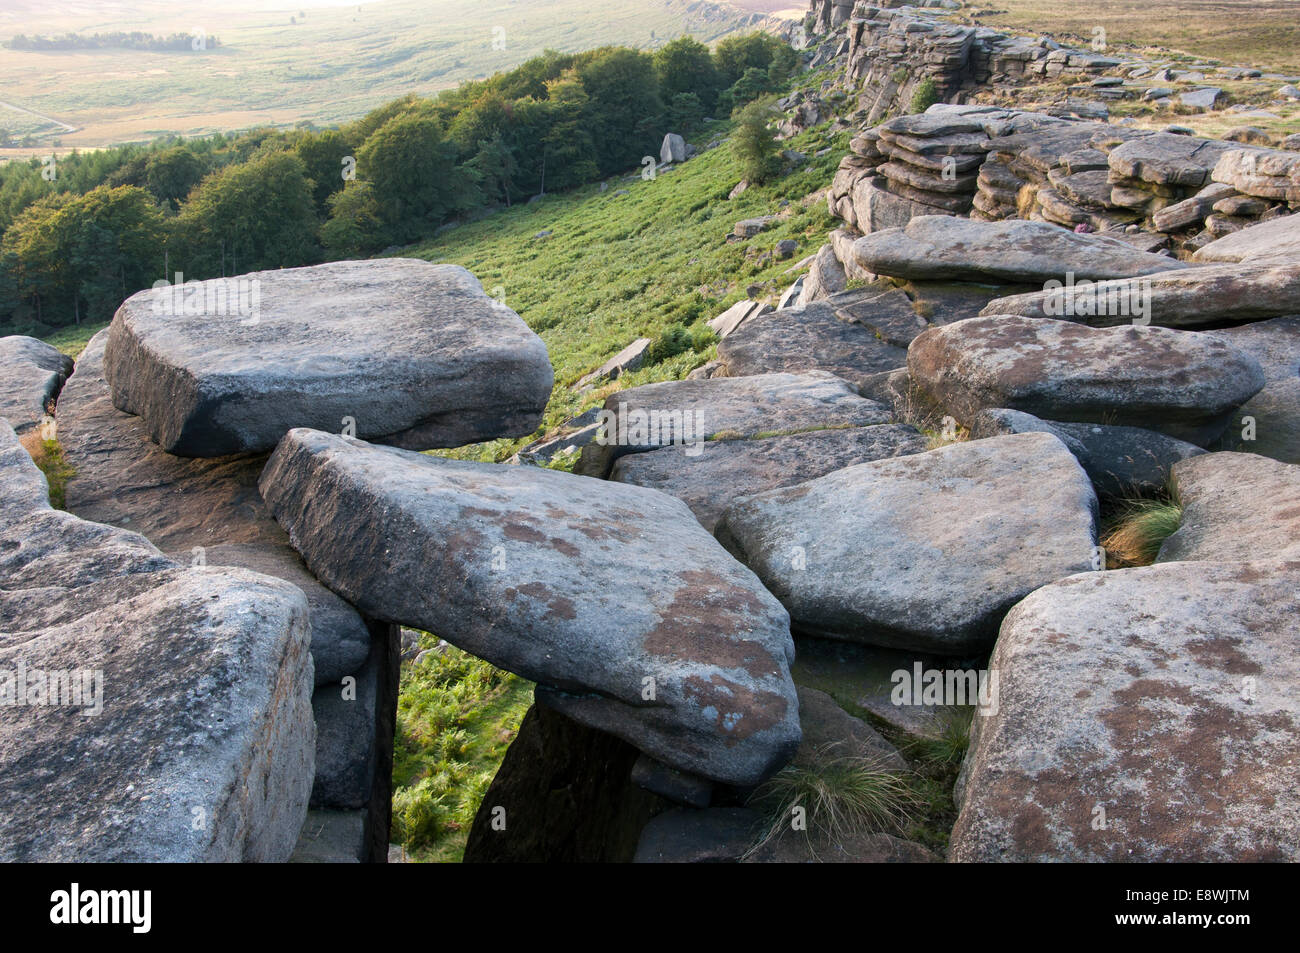 Rocks balancing on Stanage edge, Derbyshire, Peak District. A dramatic landscape popular with walkers and climbers. Stock Photo